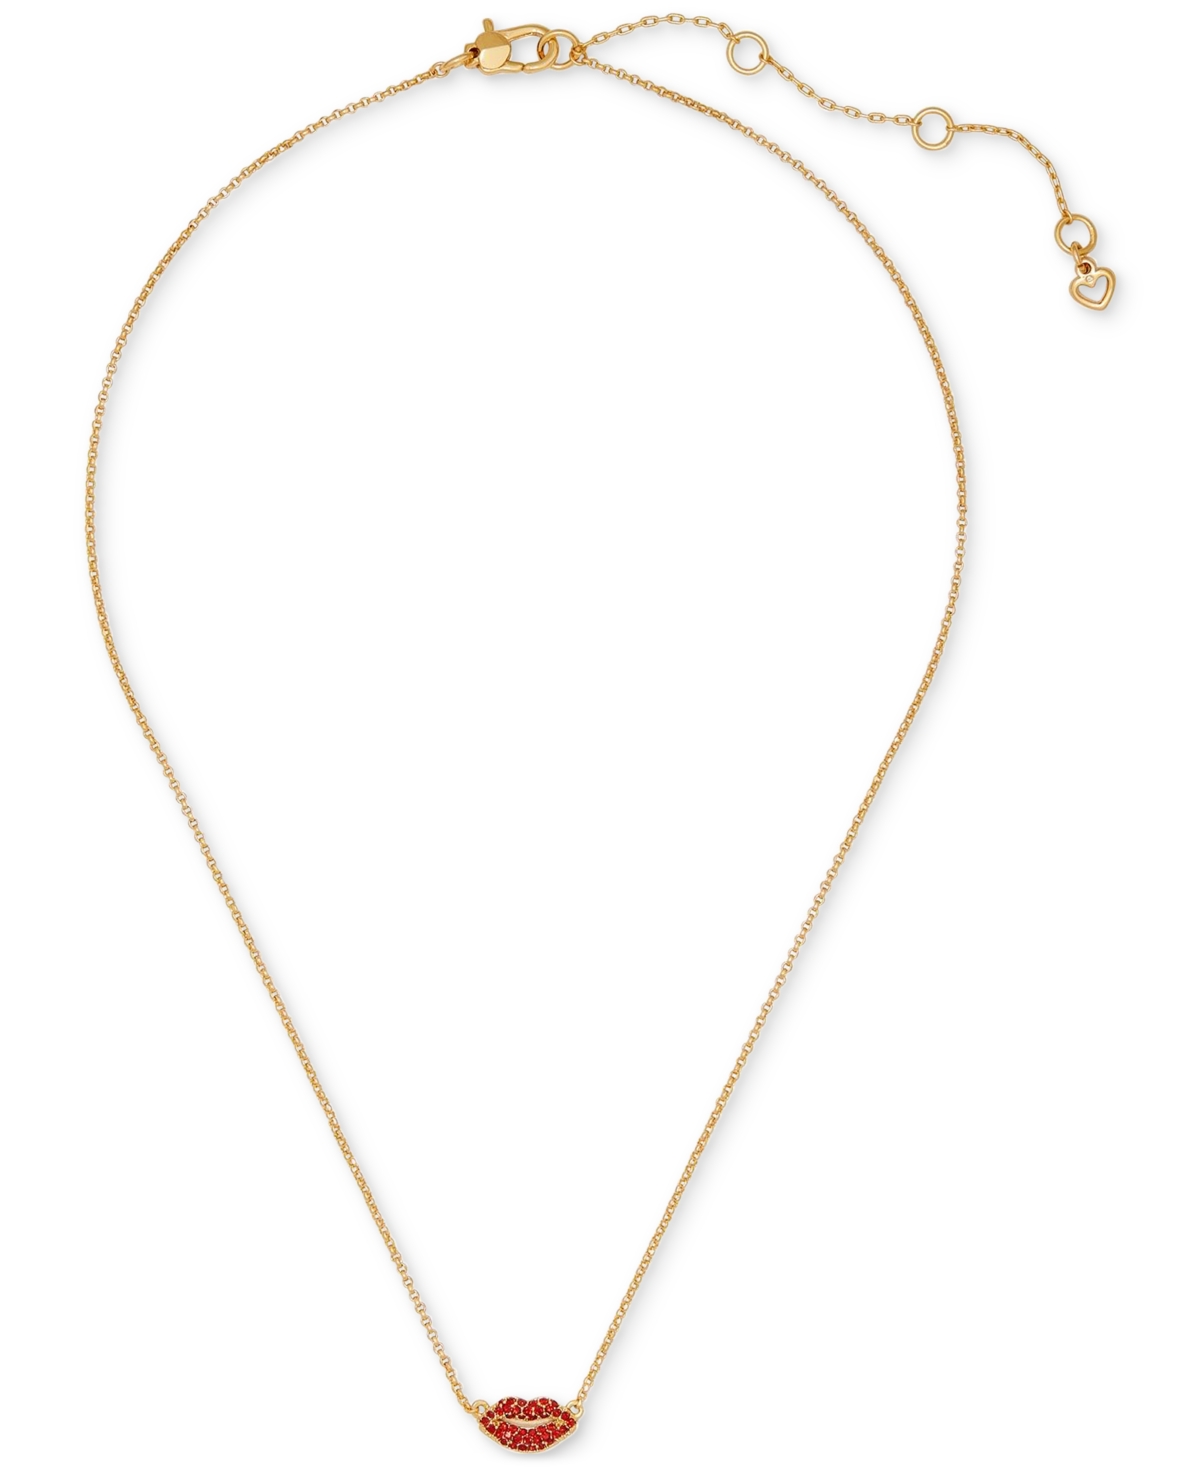 Kate Spade Gold-tone Crystal Lip Pendant Necklace, 16" + 3" Extender In Red.